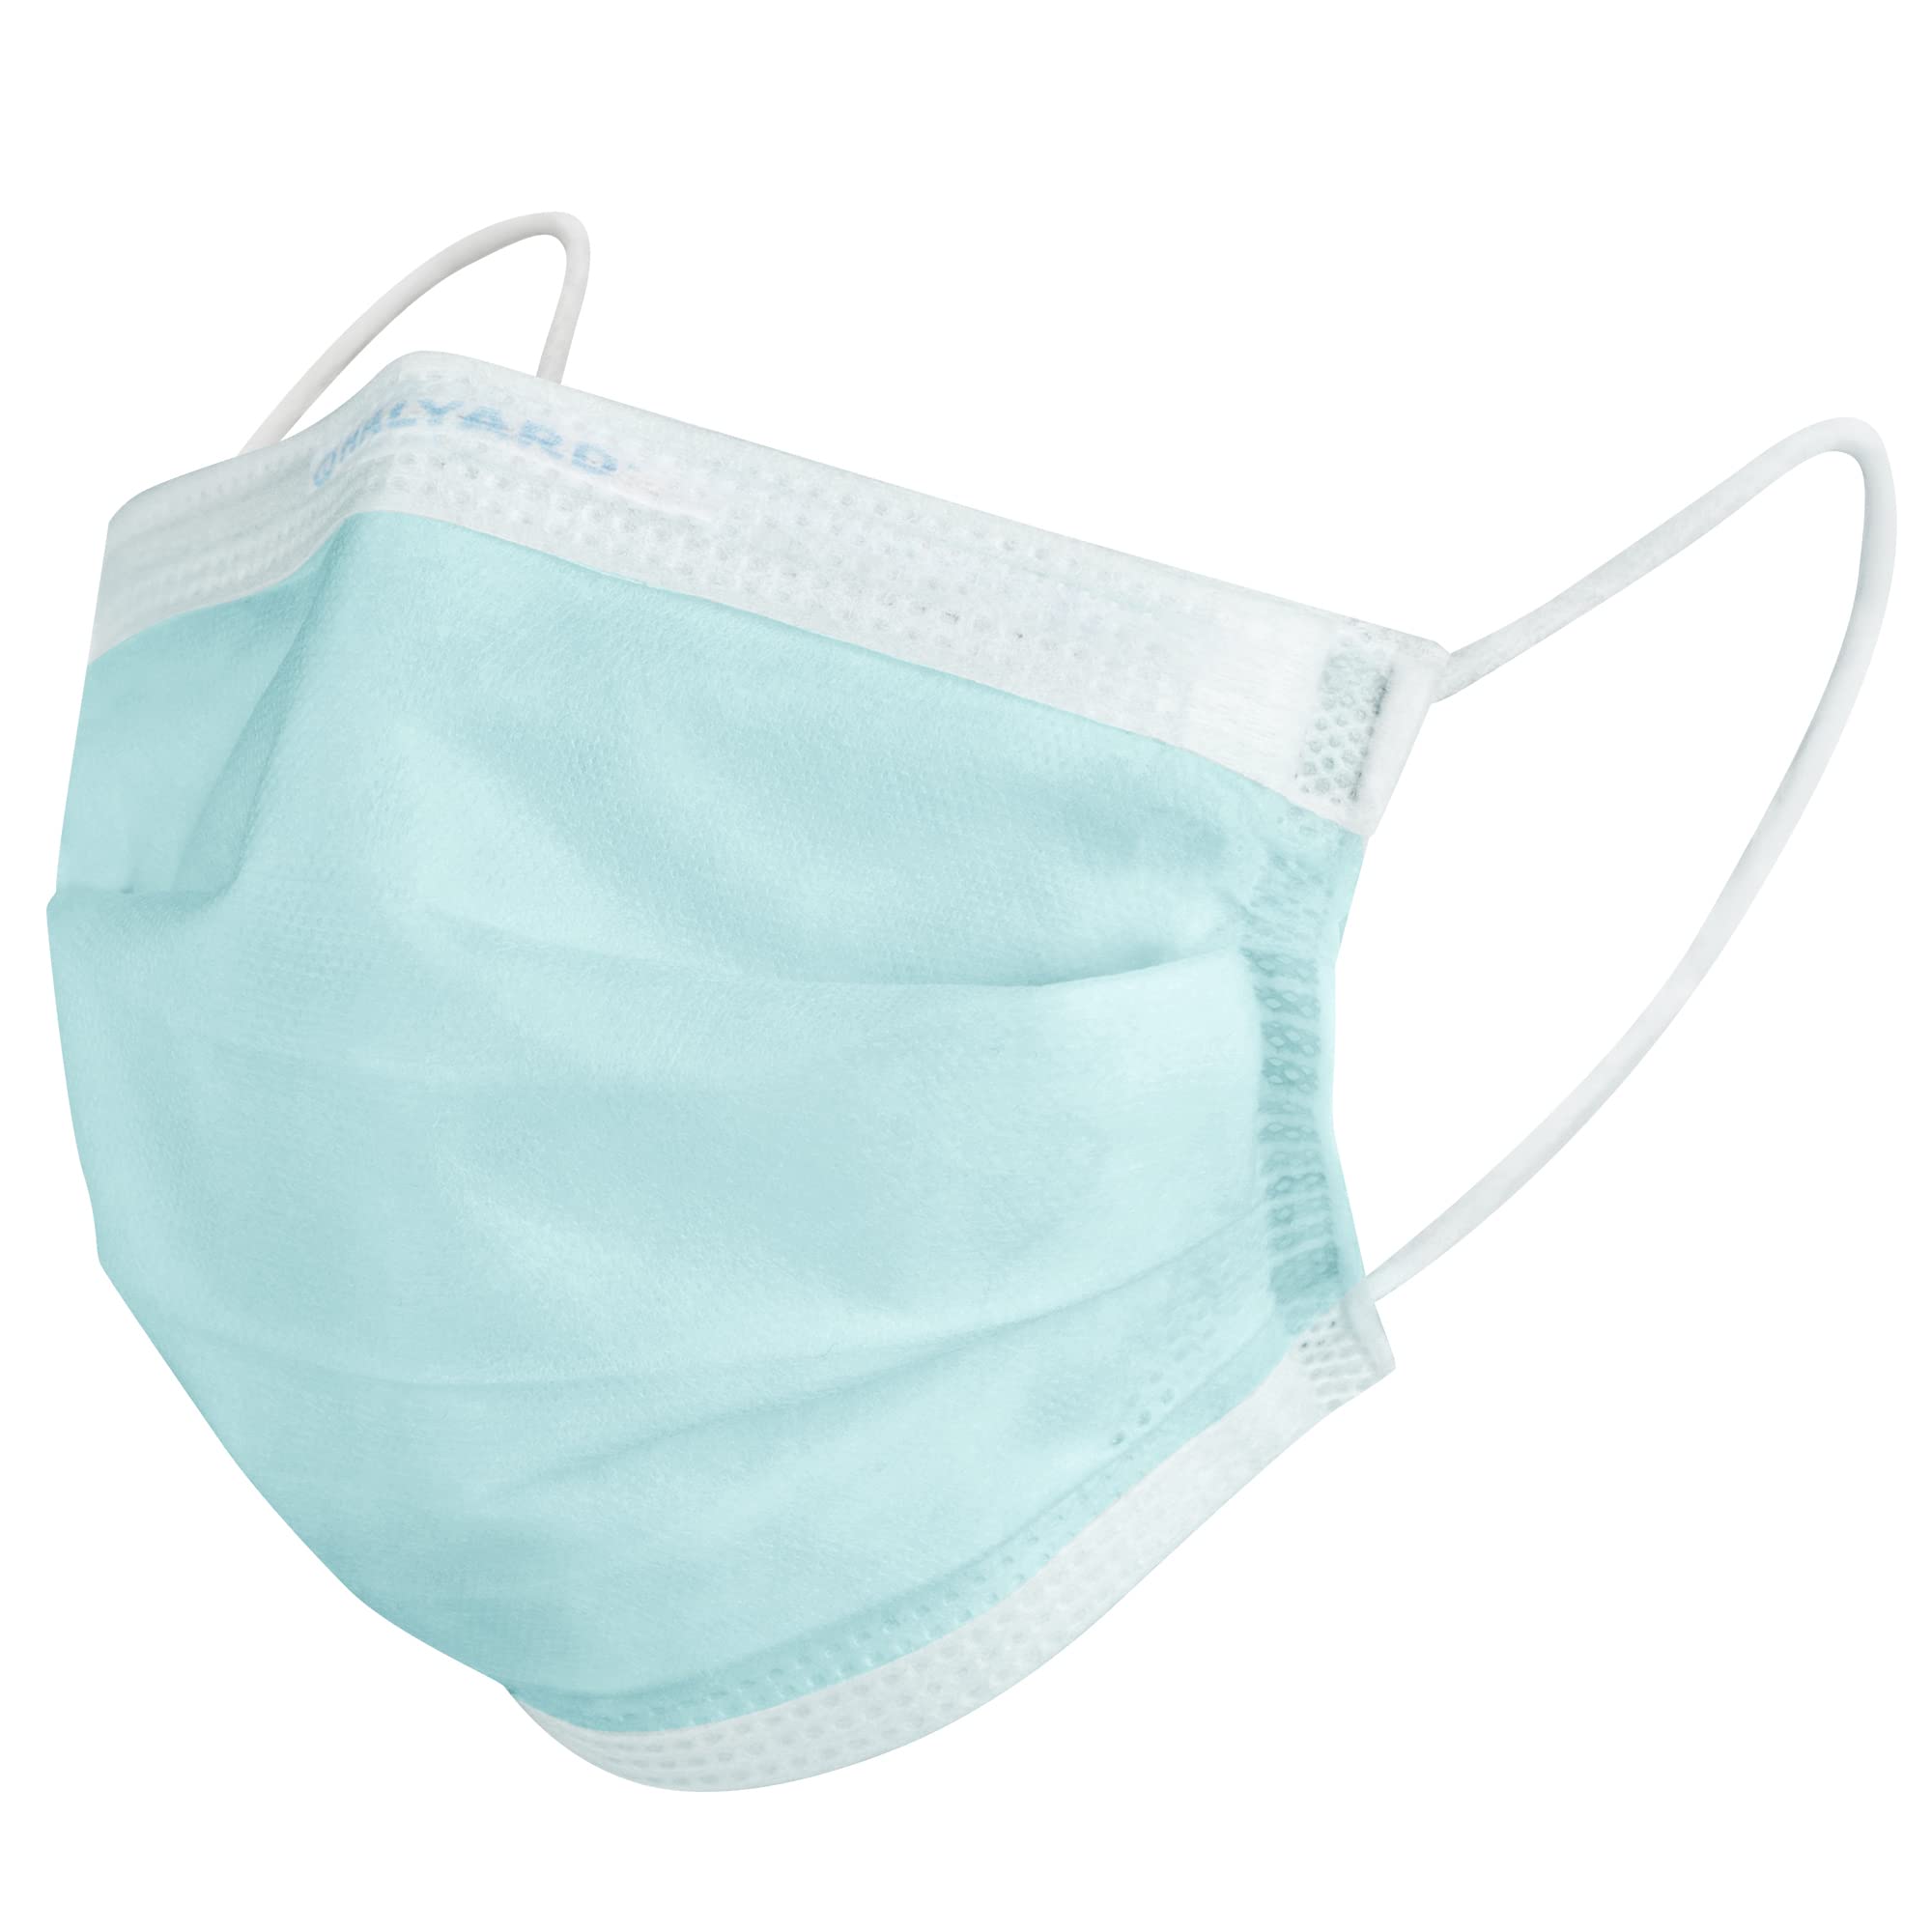 HALYARD FLUIDSHIELD Level 3 Disposable Procedure Mask w/SO Soft Lining/Earloops